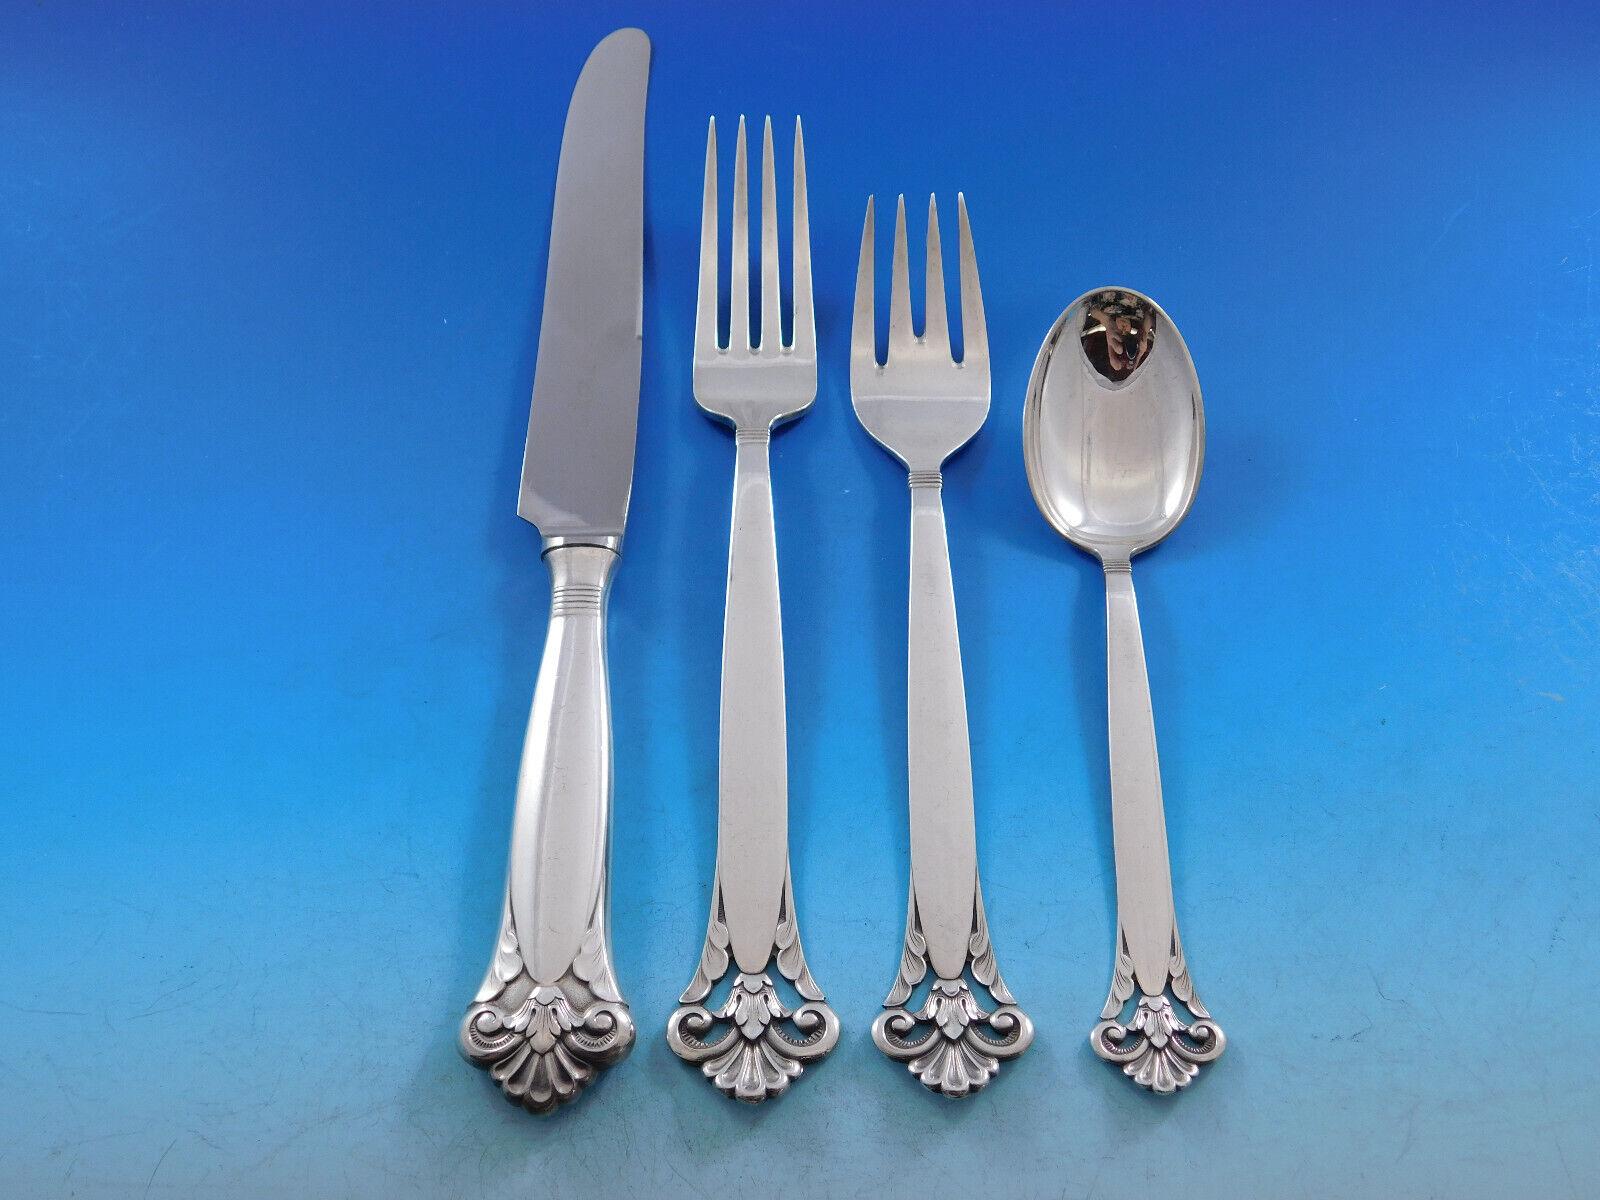 Scarce Cloister by Marthinsen, Norway, Sterling Silver flatware set with gorgeous pierced handle - 64 pieces. This set includes:


12 Dinner Knives, 9 5/8